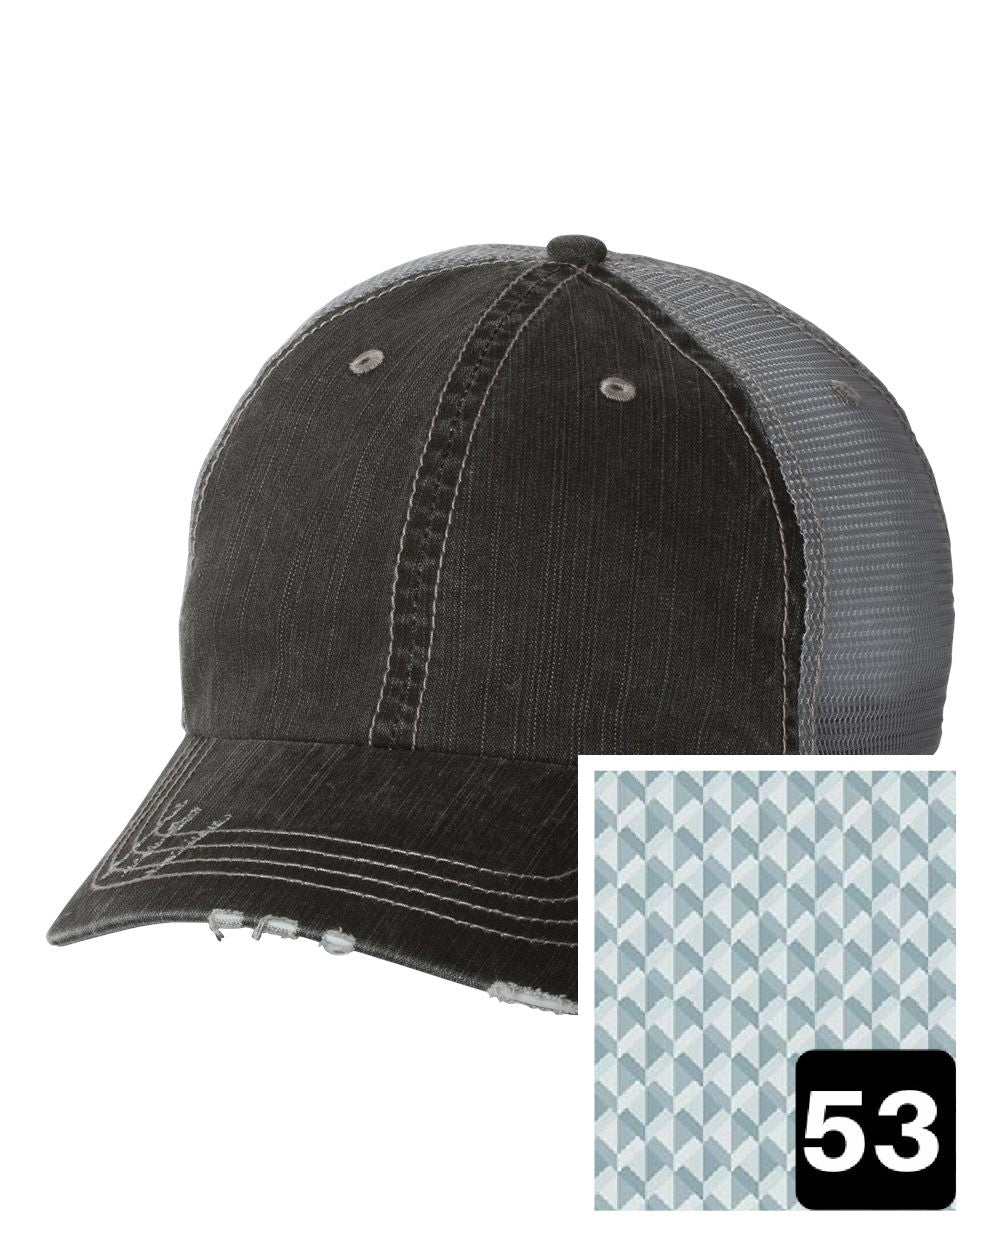 gray distressed trucker hat with multi-color stripe fabric state of New Hampshire